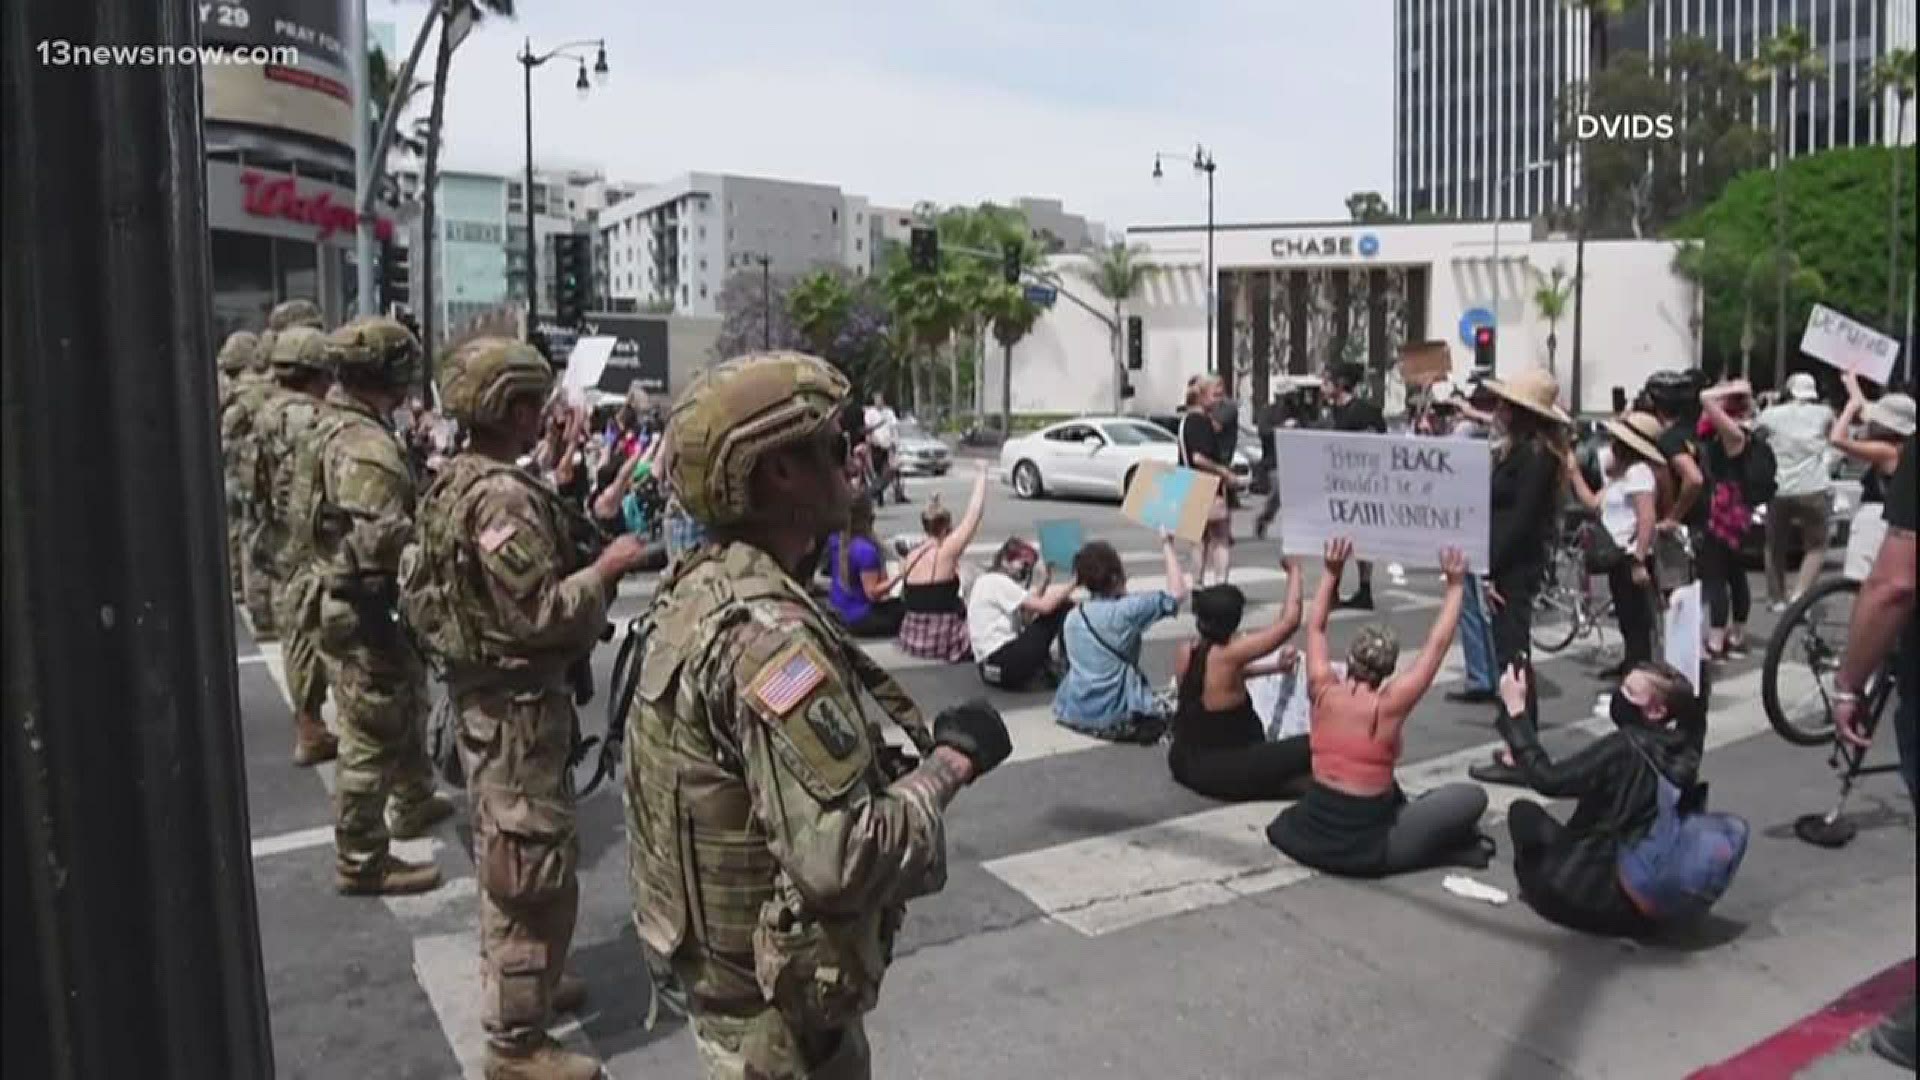 Debate continues over the federal government using active duty military to respond to civil unrest in the country.